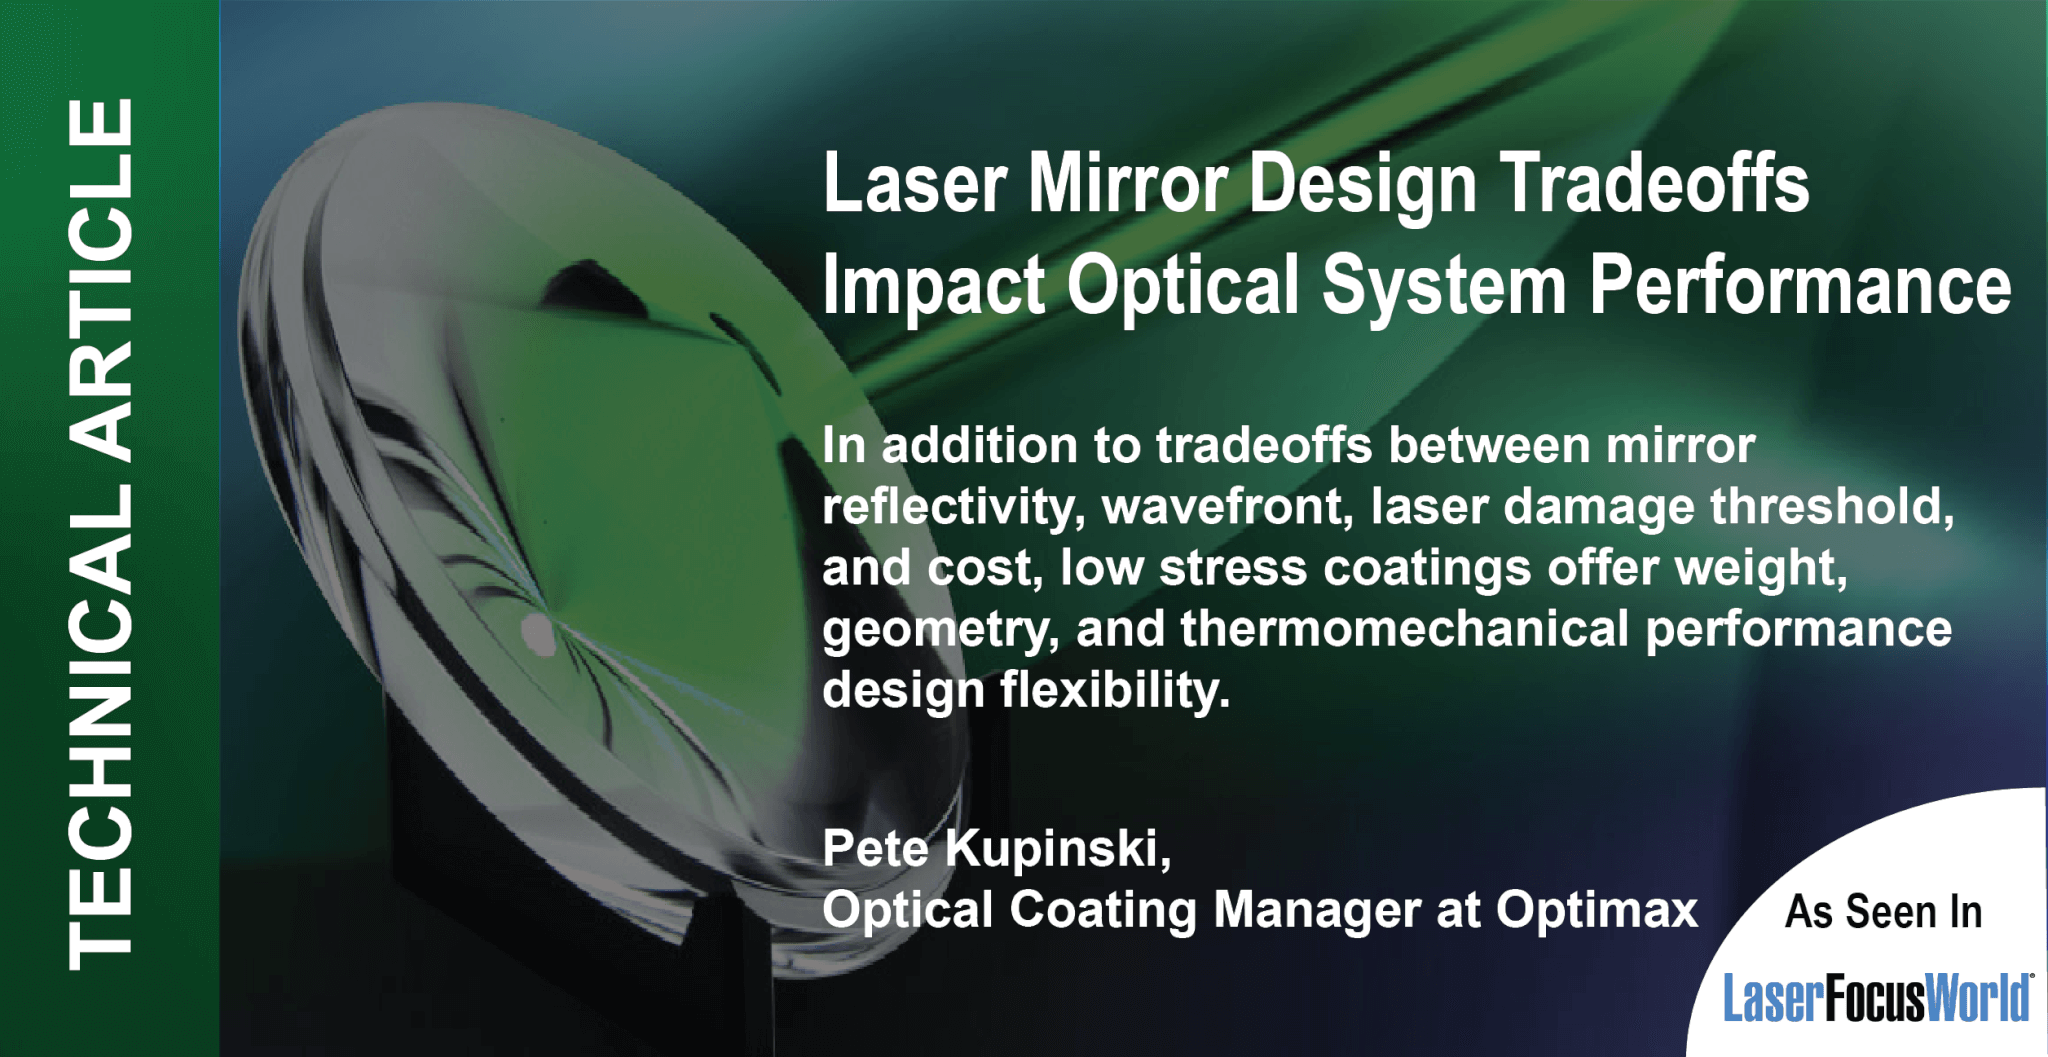 Advances in Optical Systems: Laser mirror design tradeoffs impact optical system performance